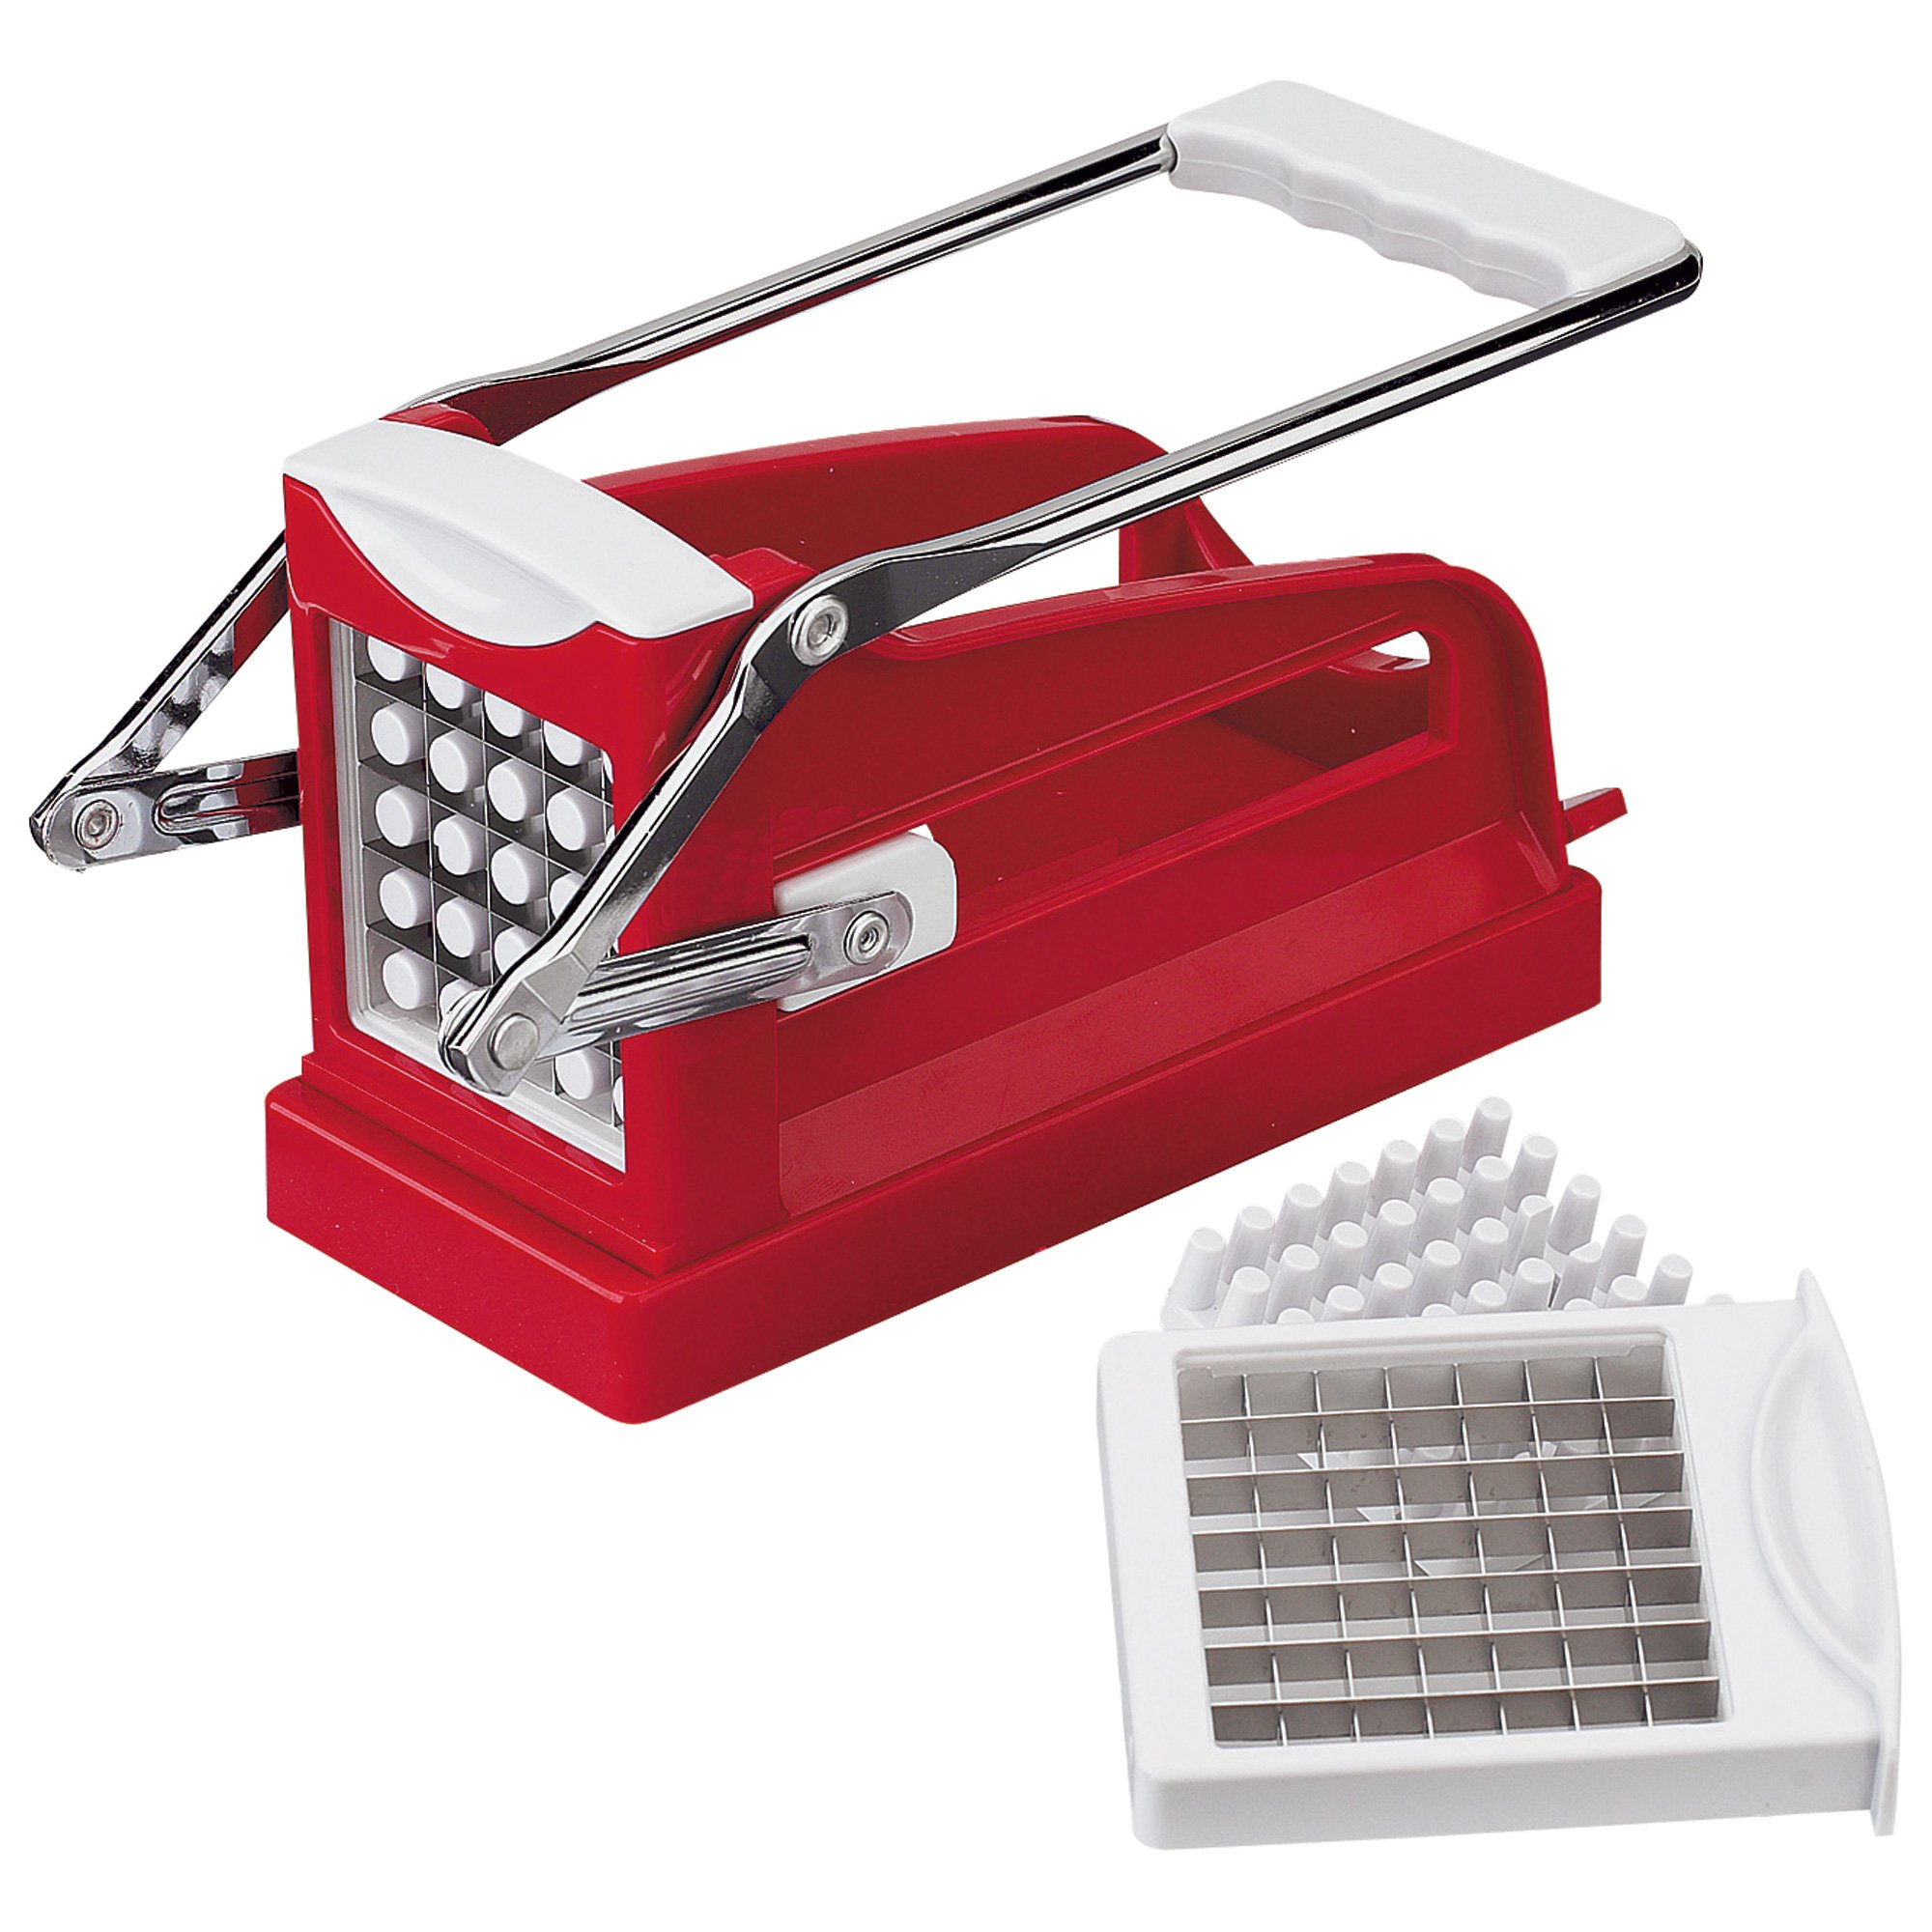 Weston Professional French Fry Cutter and Vegetable Dicer